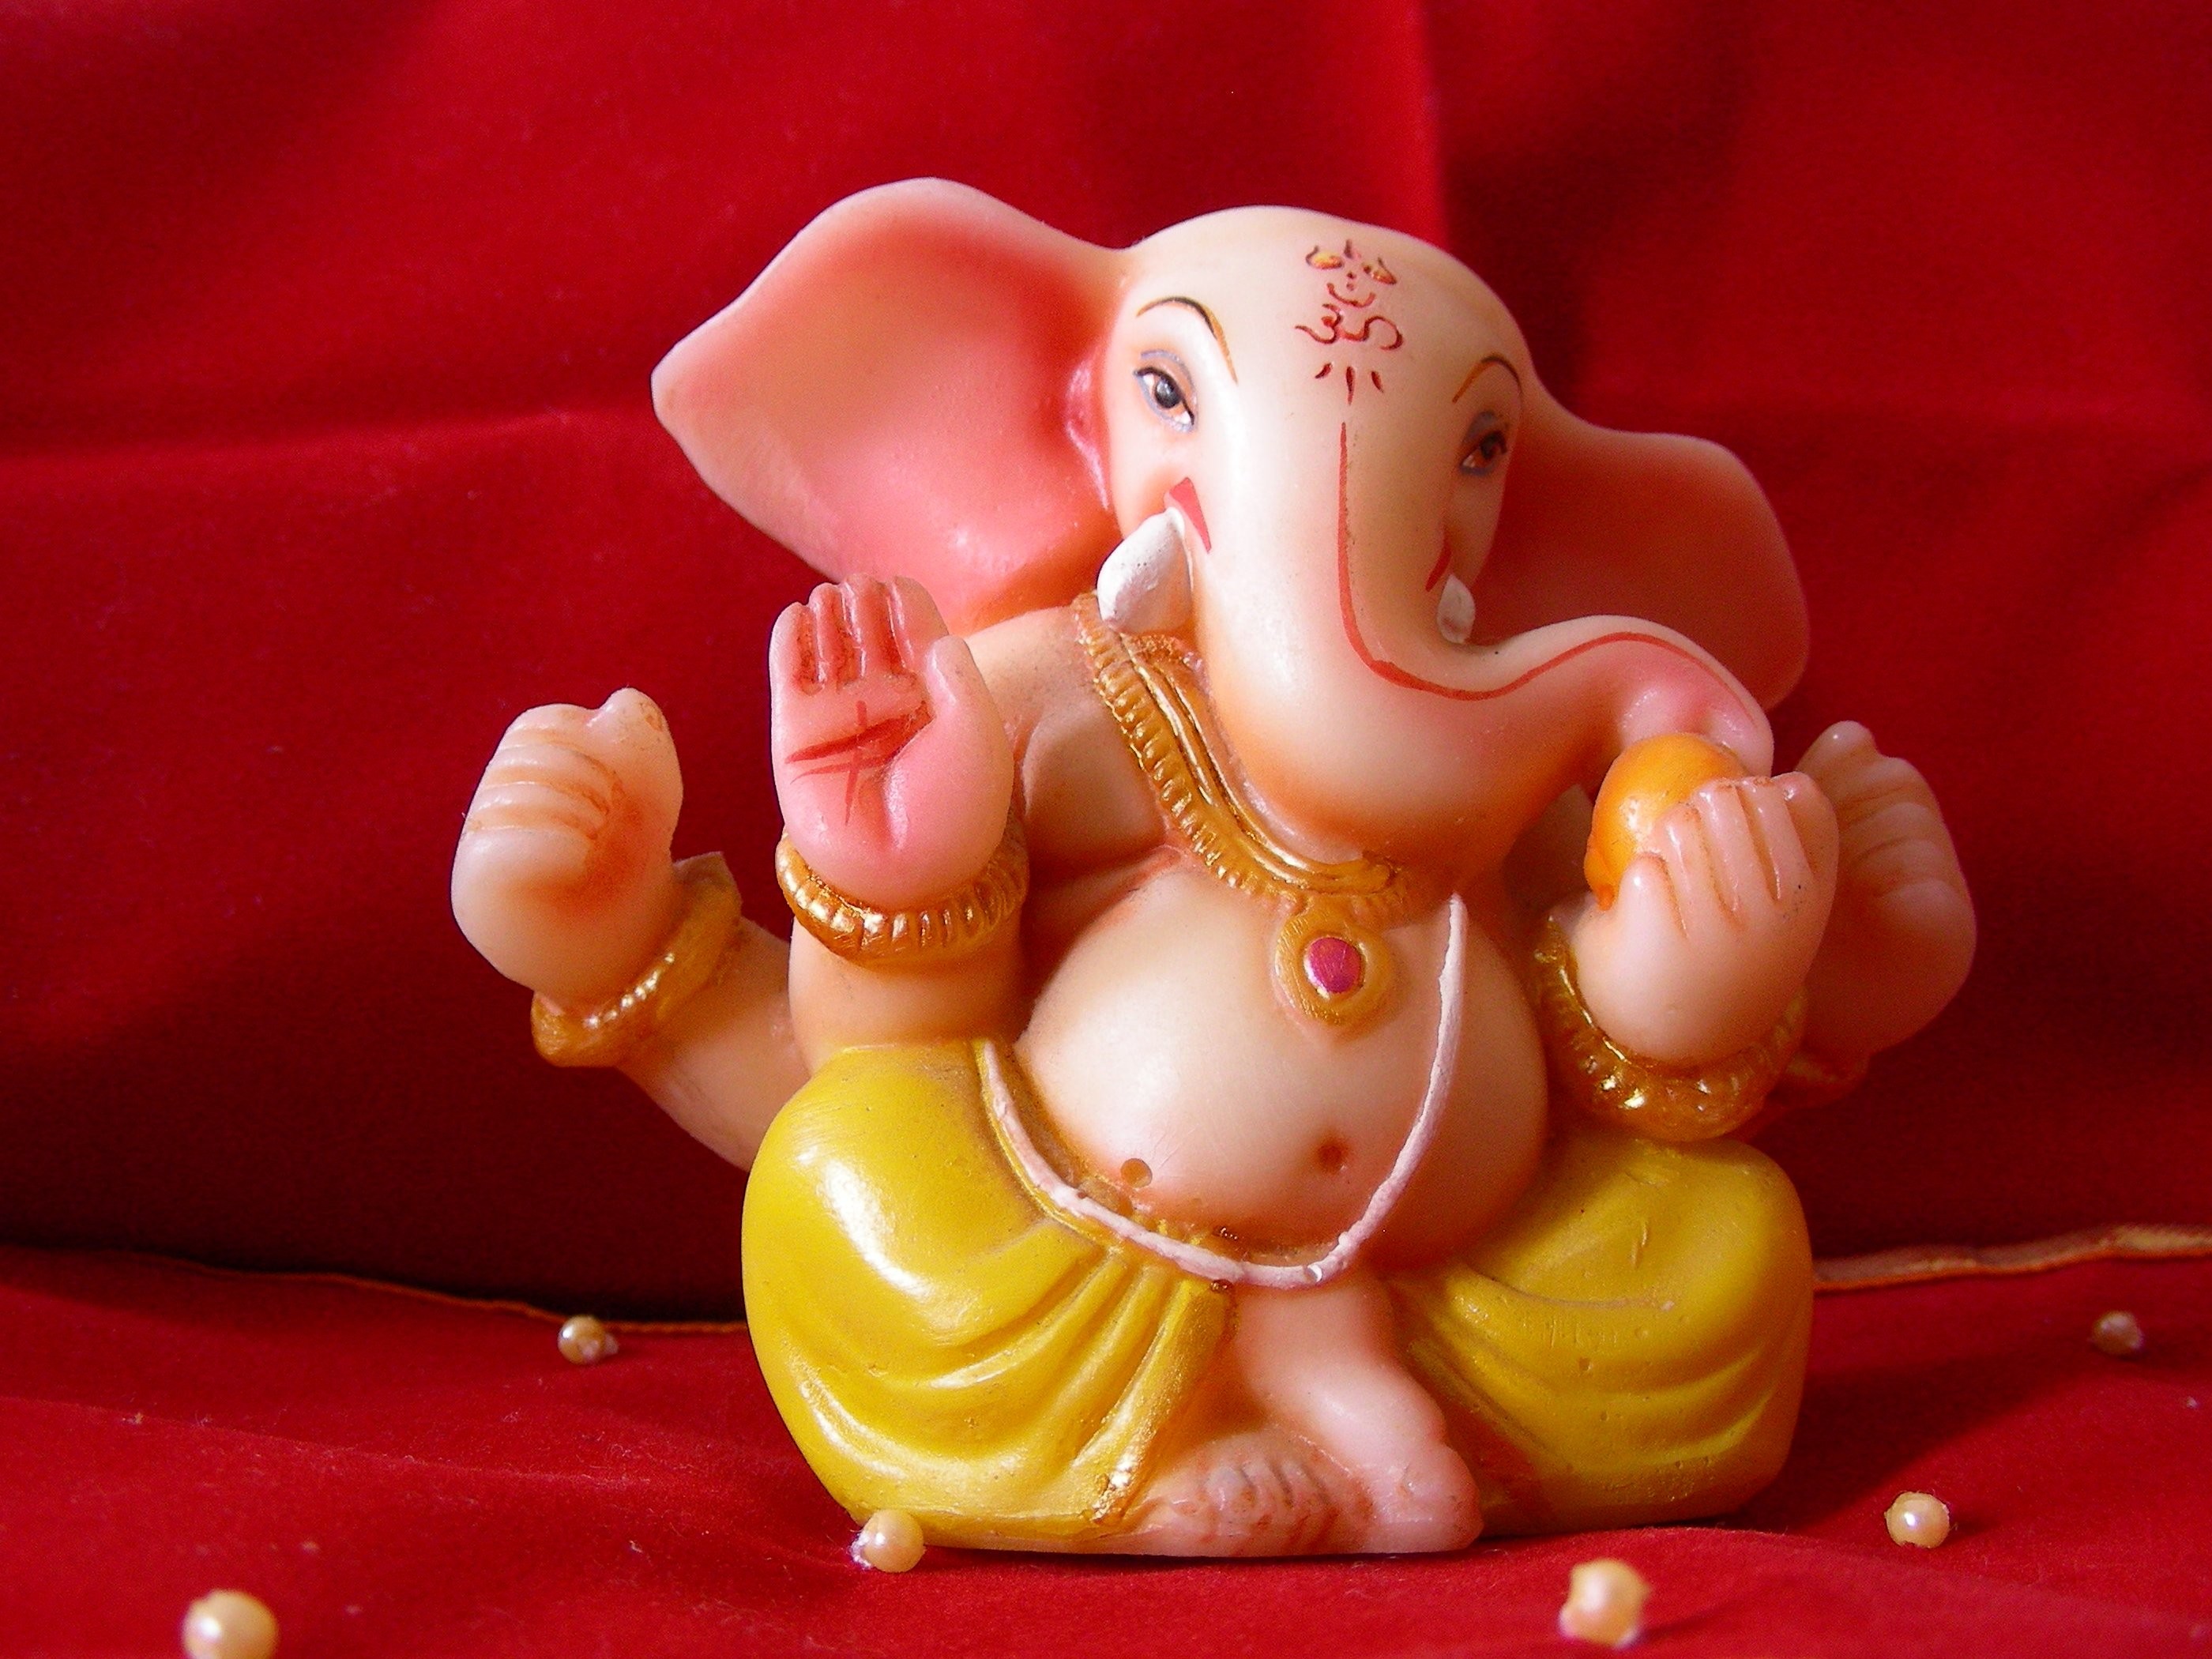 Happy Ganesha Chaturthi 2022 Wishes Images Quotes Status Messages  Photos SMS Wallpaper Pics and Greetings   Times of India